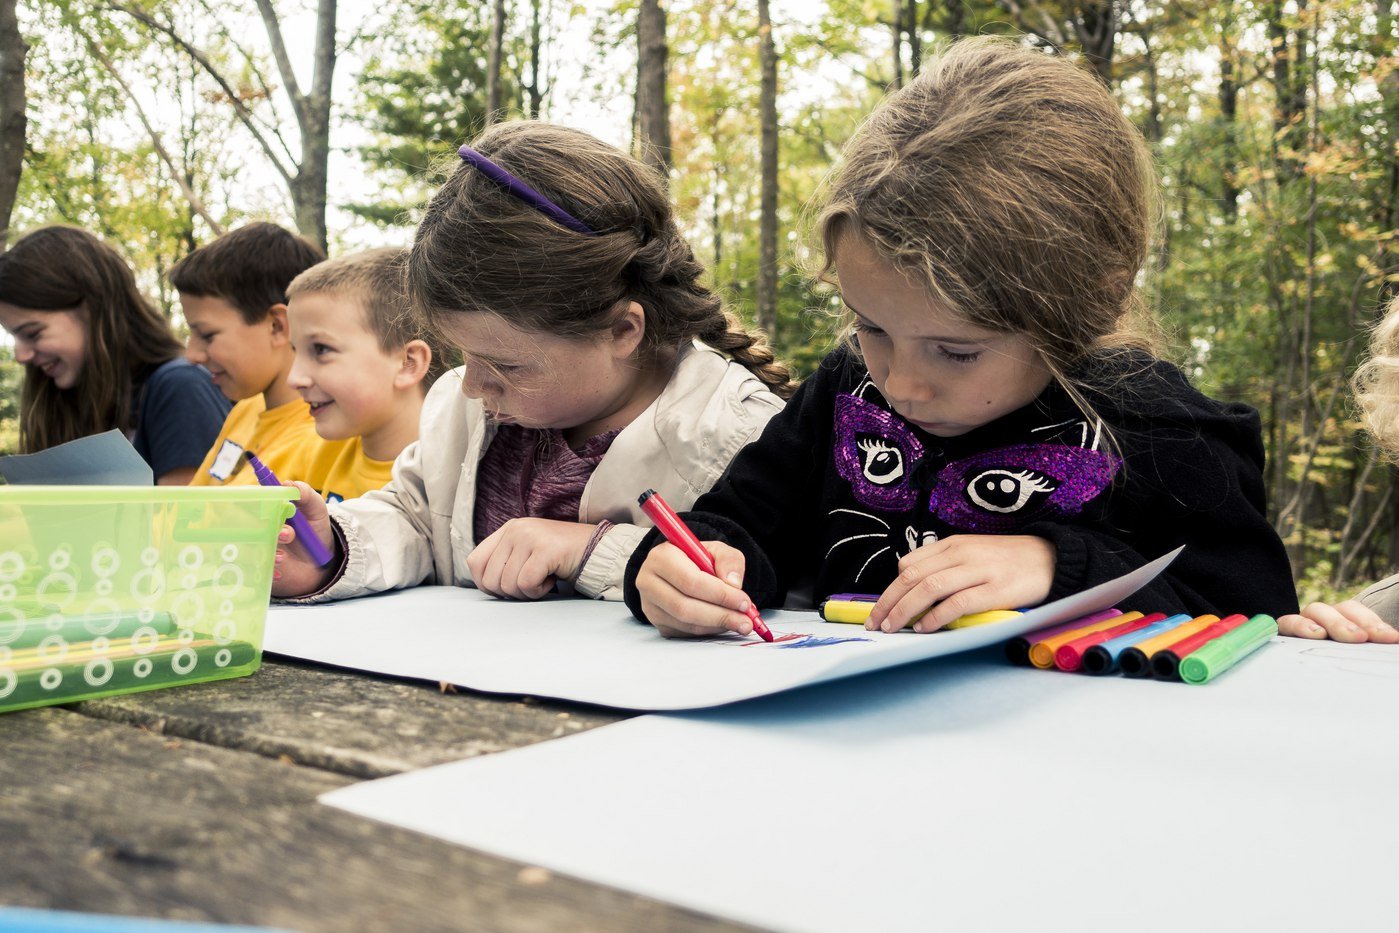 PA cyber school kids drawing together at picnic table